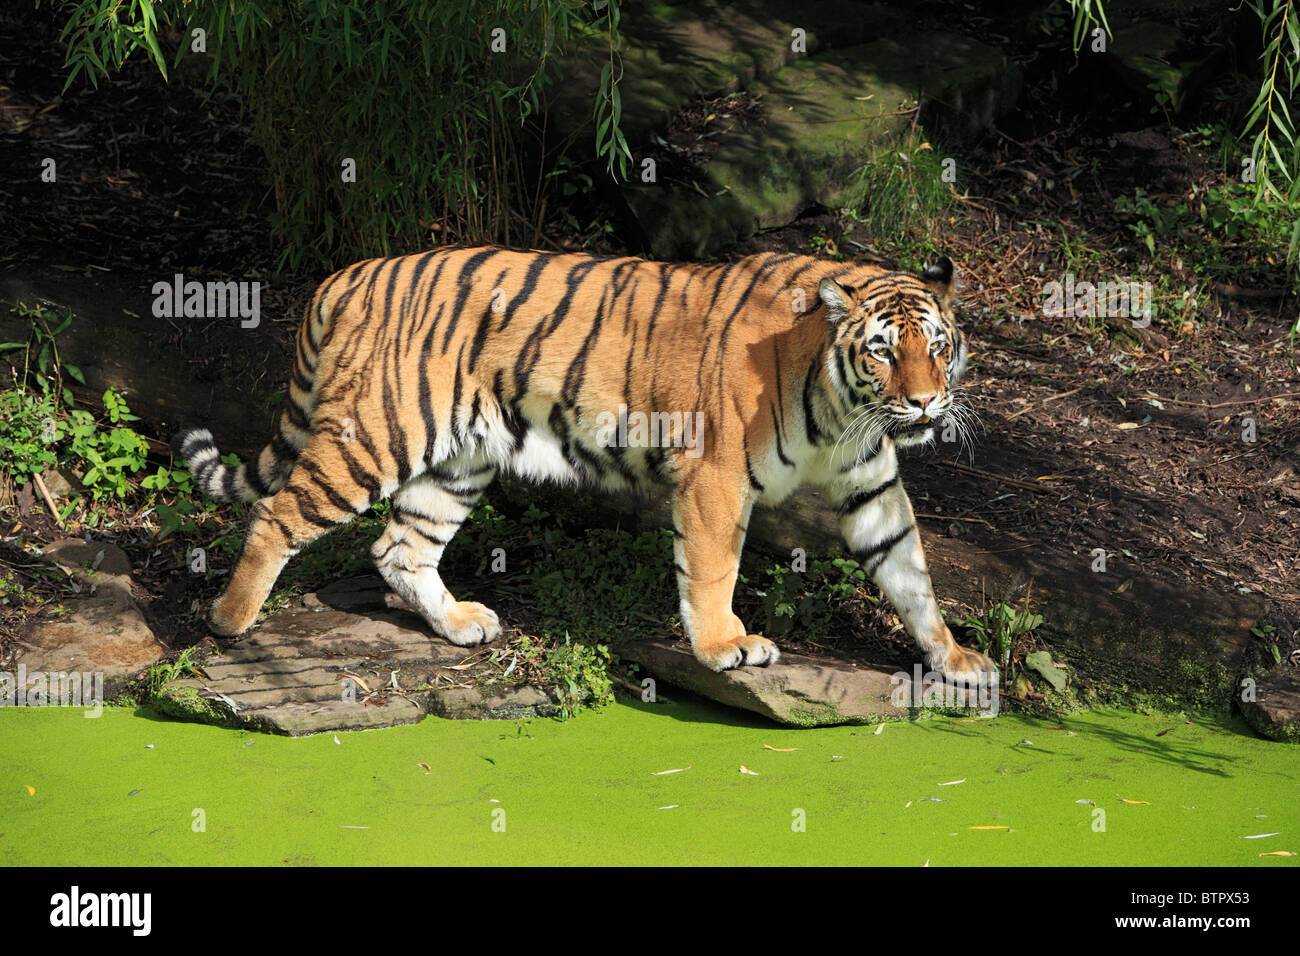 Siberian Tiger, Panthera tigris altaica, zoological gardens, all-weather zoo in Muenster, D-Muenster, Westphalia, Muensterland, North Rhine-Westphalia Stock Photo